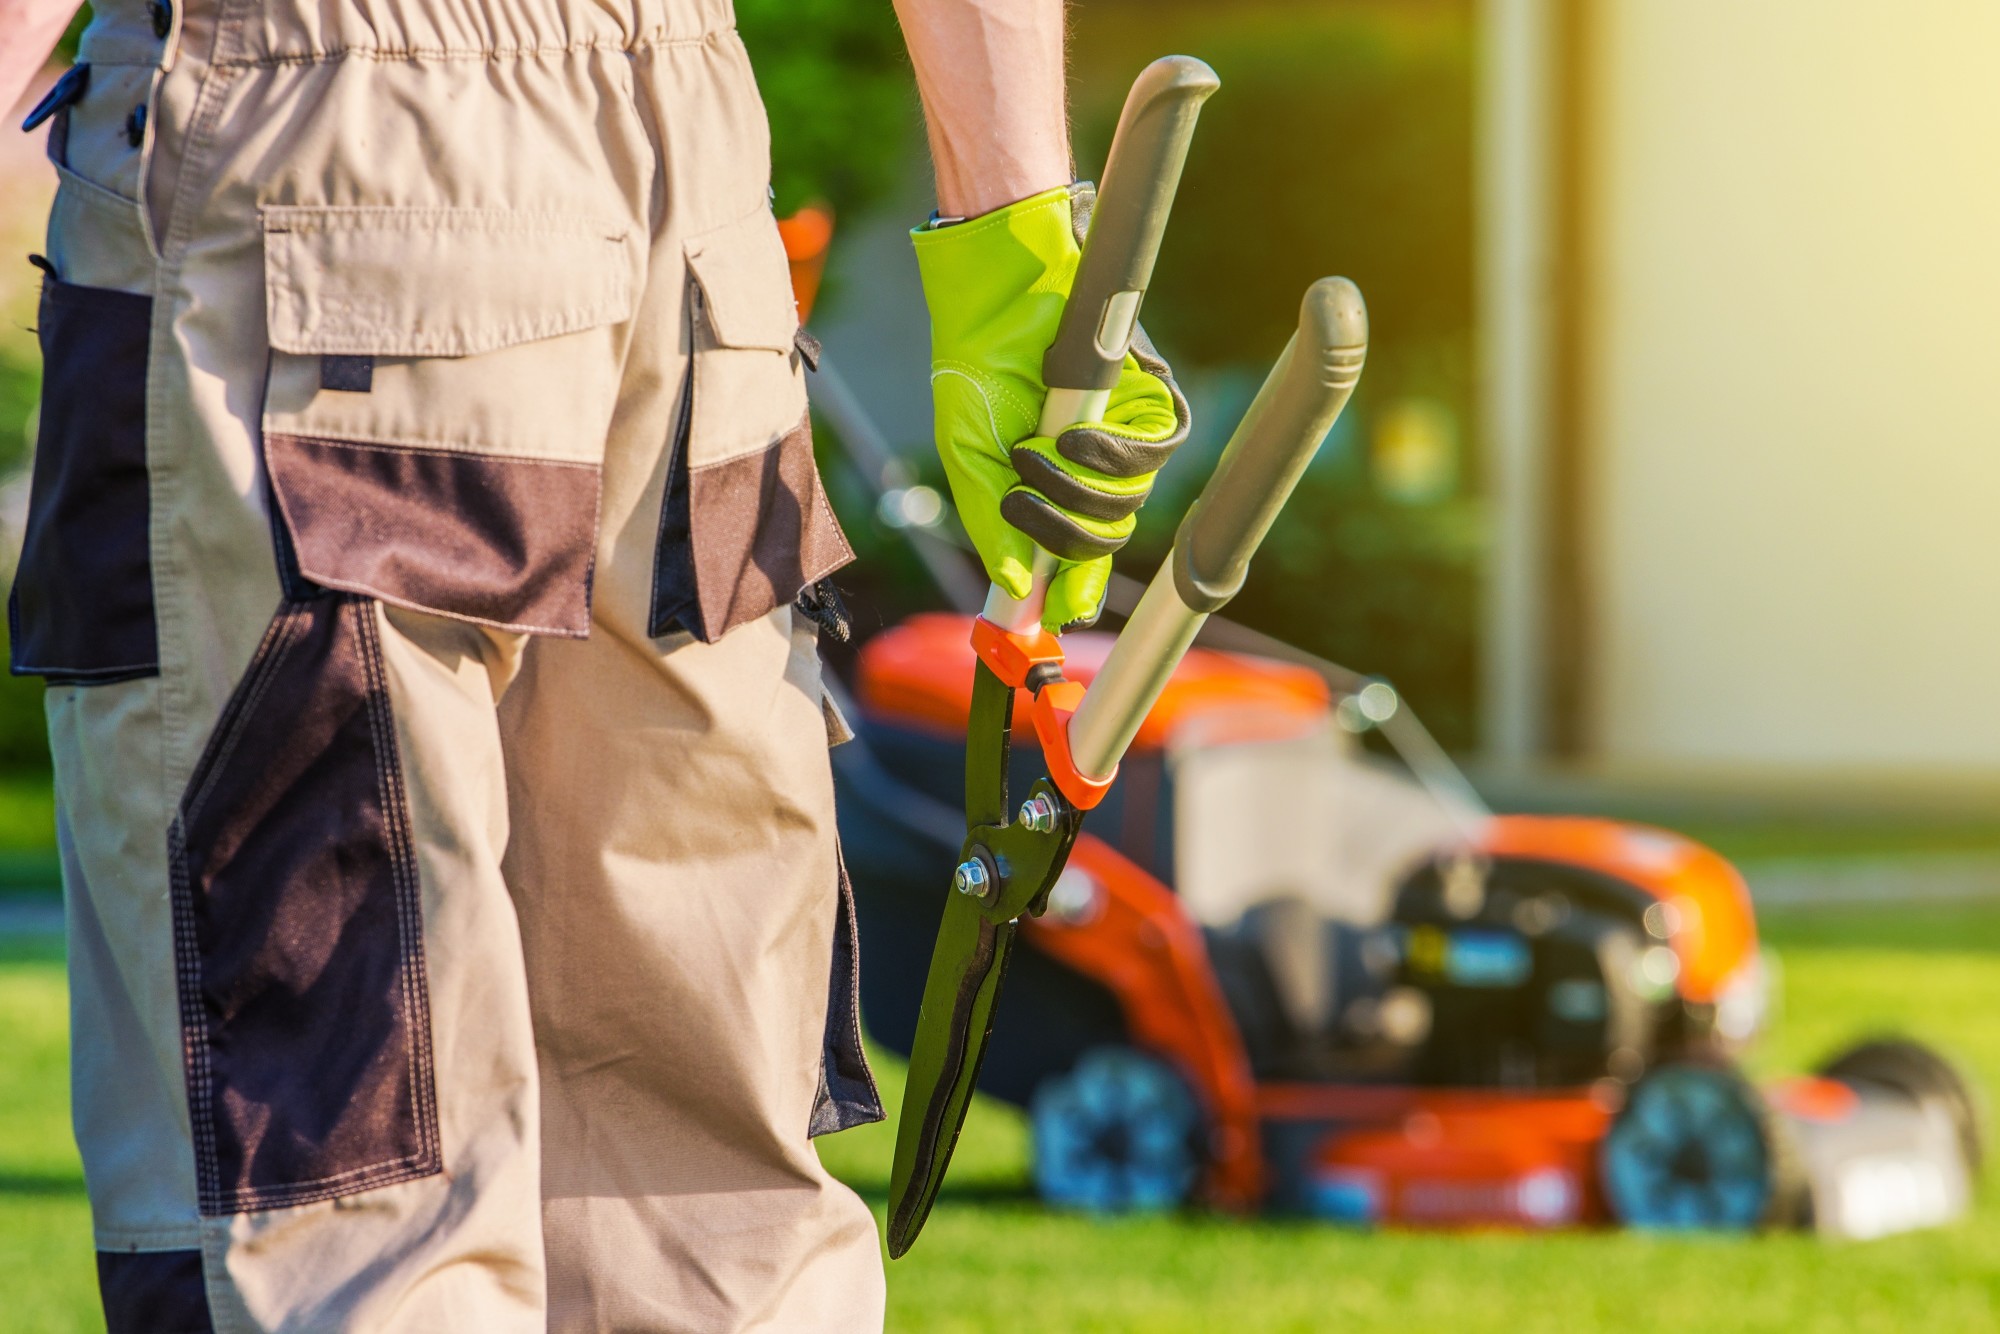 7 Factors to Consider When Hiring Lawn Care Professionals